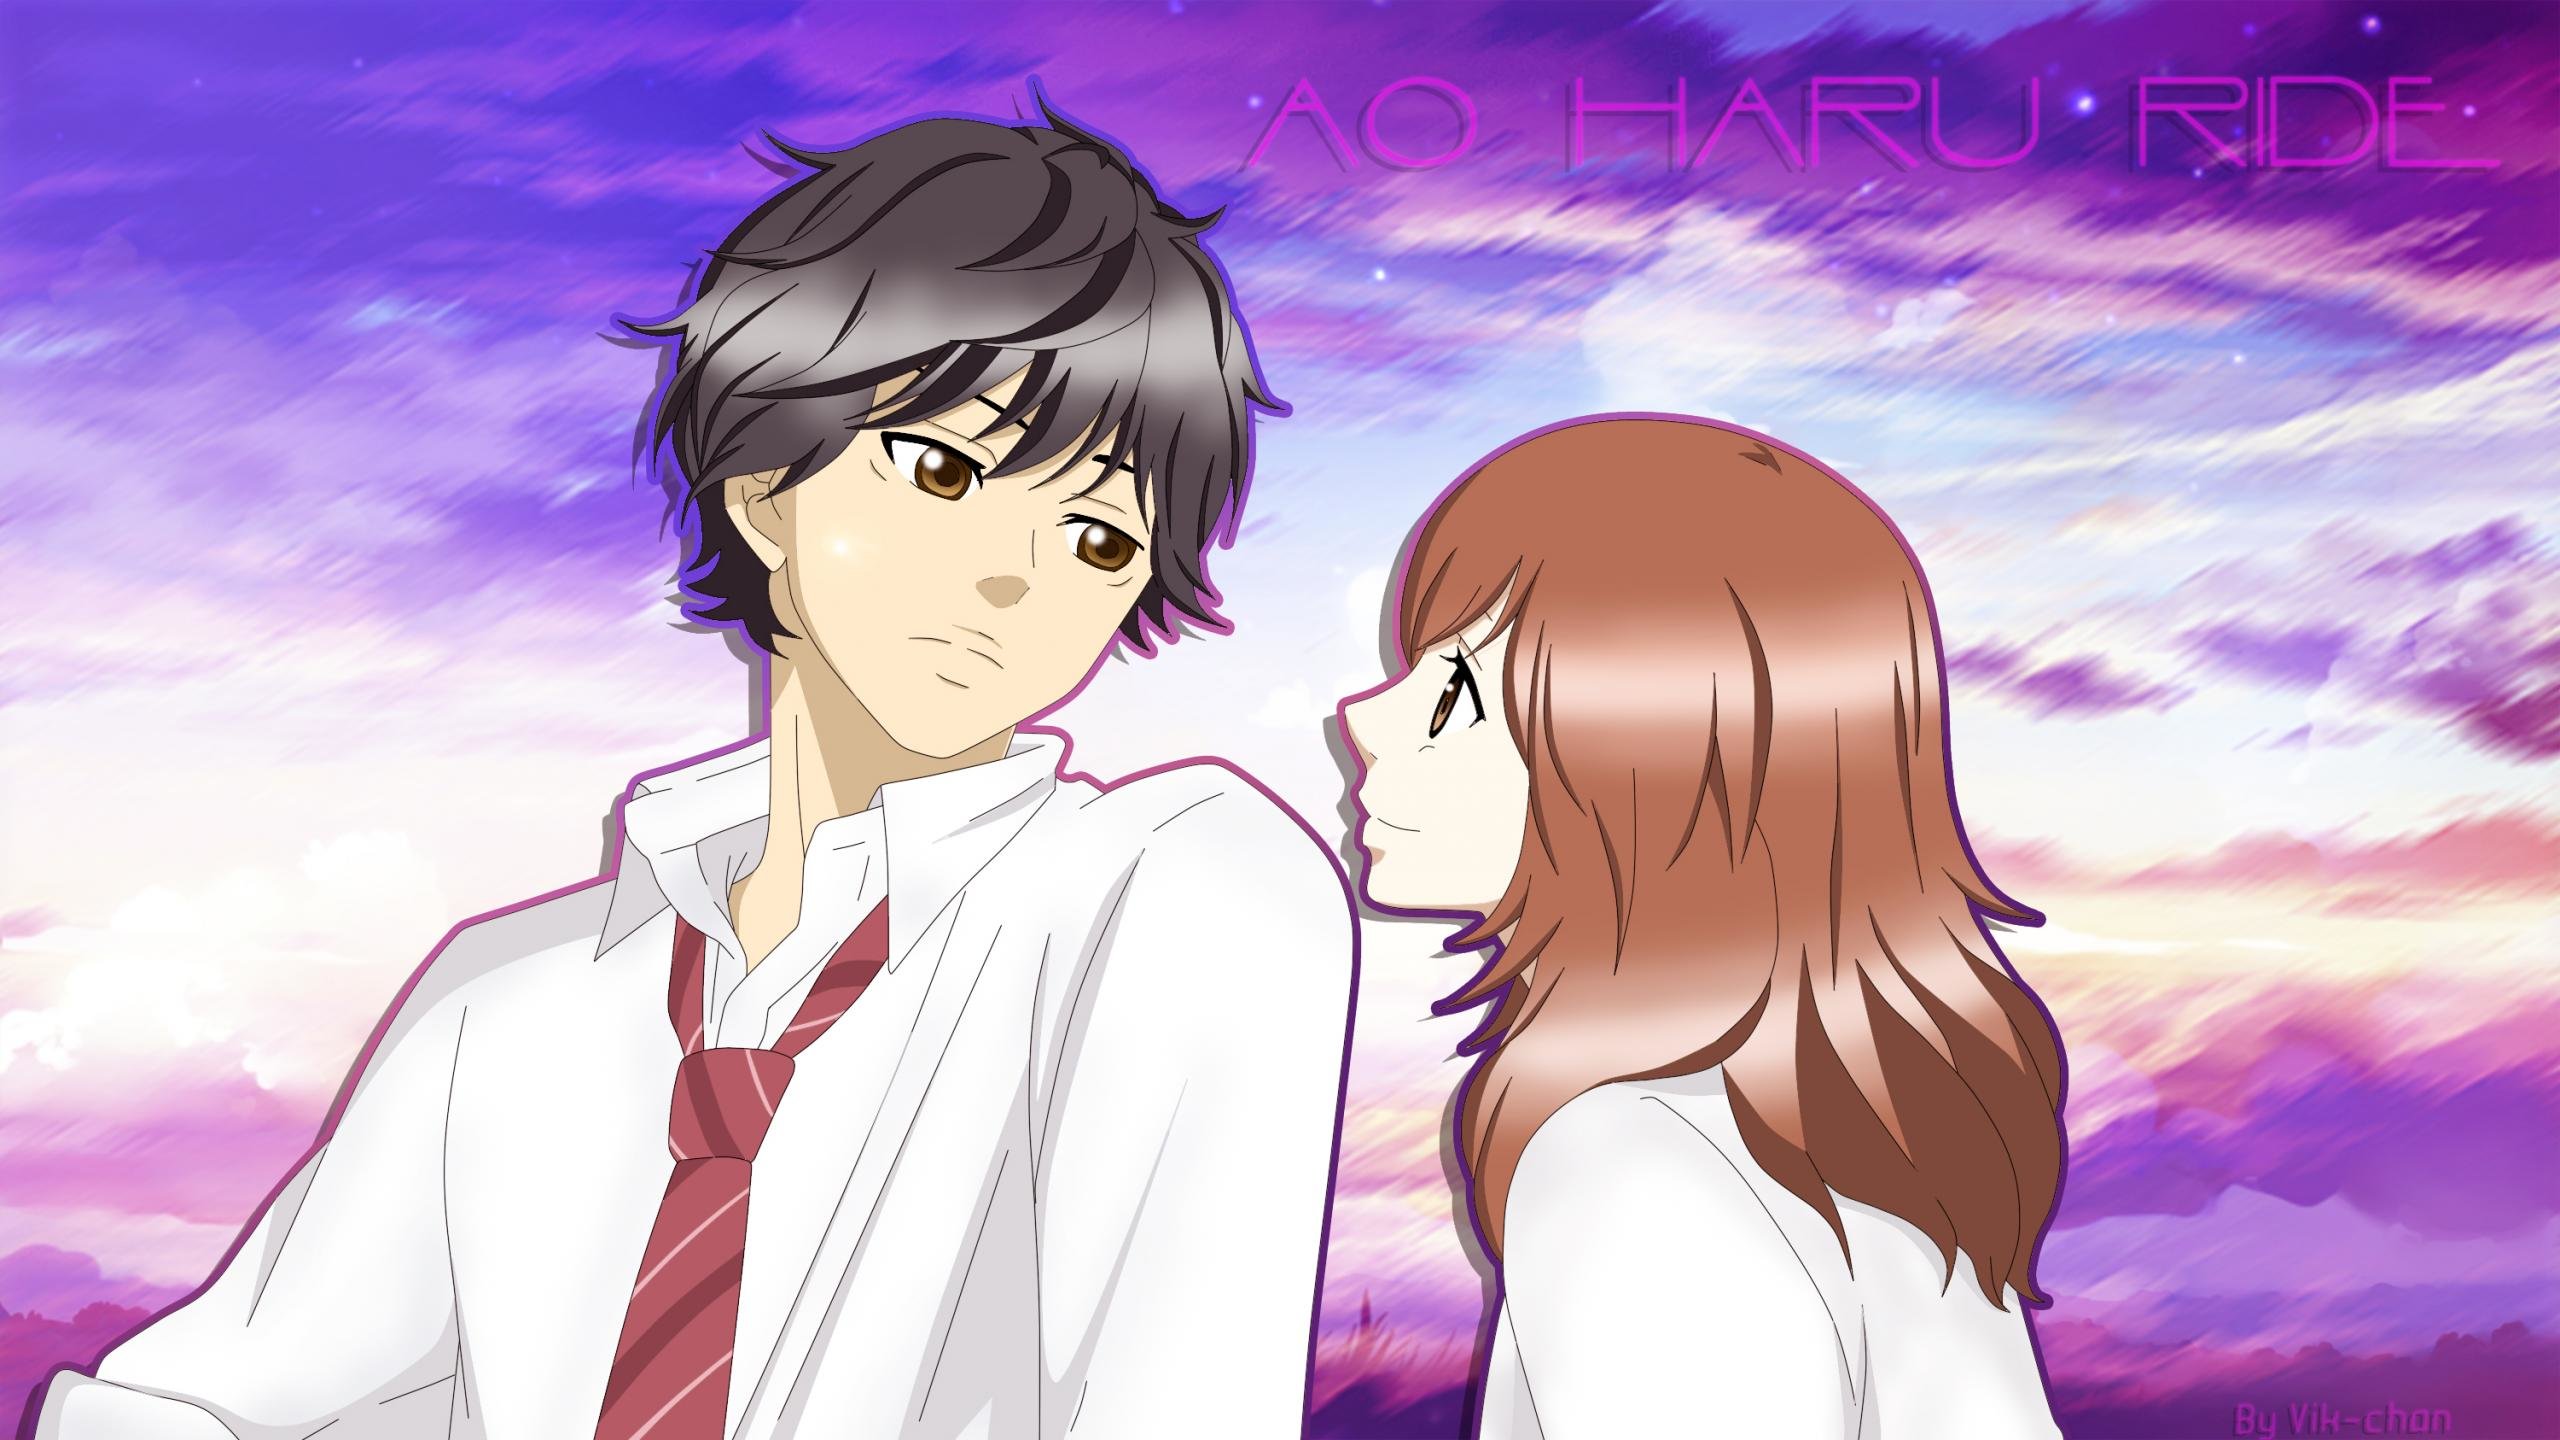 Awesome Ao Haru Ride Wallpaper Id For HD Puter